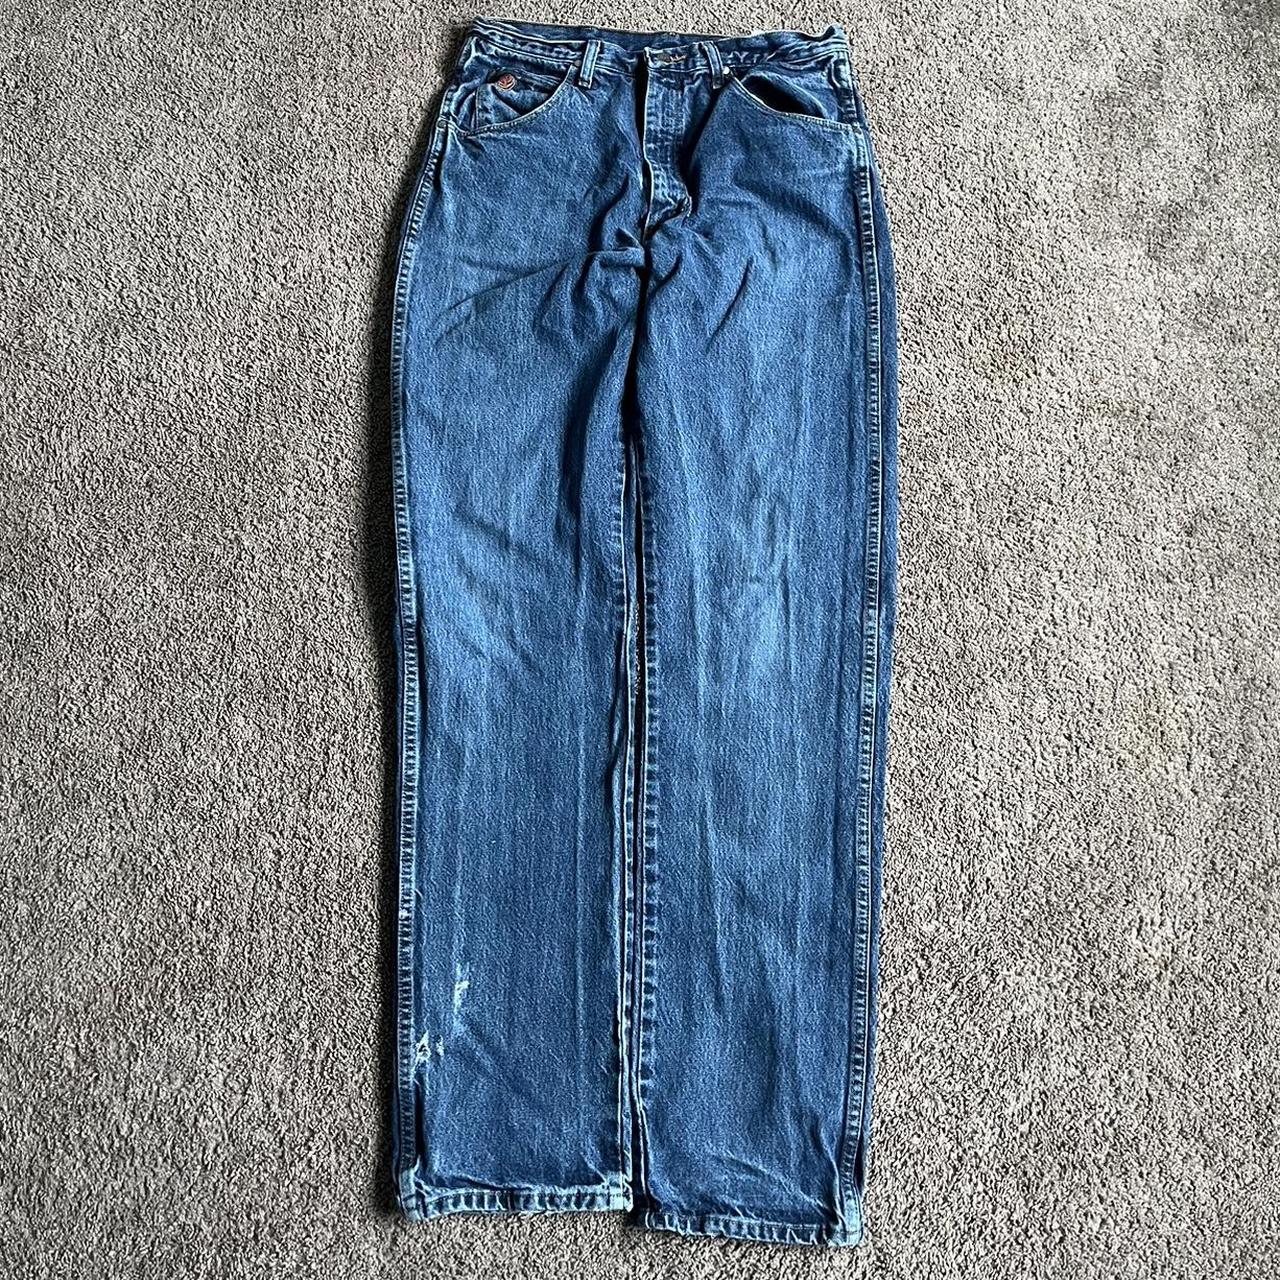 20X Baggy blue jeans with some fade and... - Depop